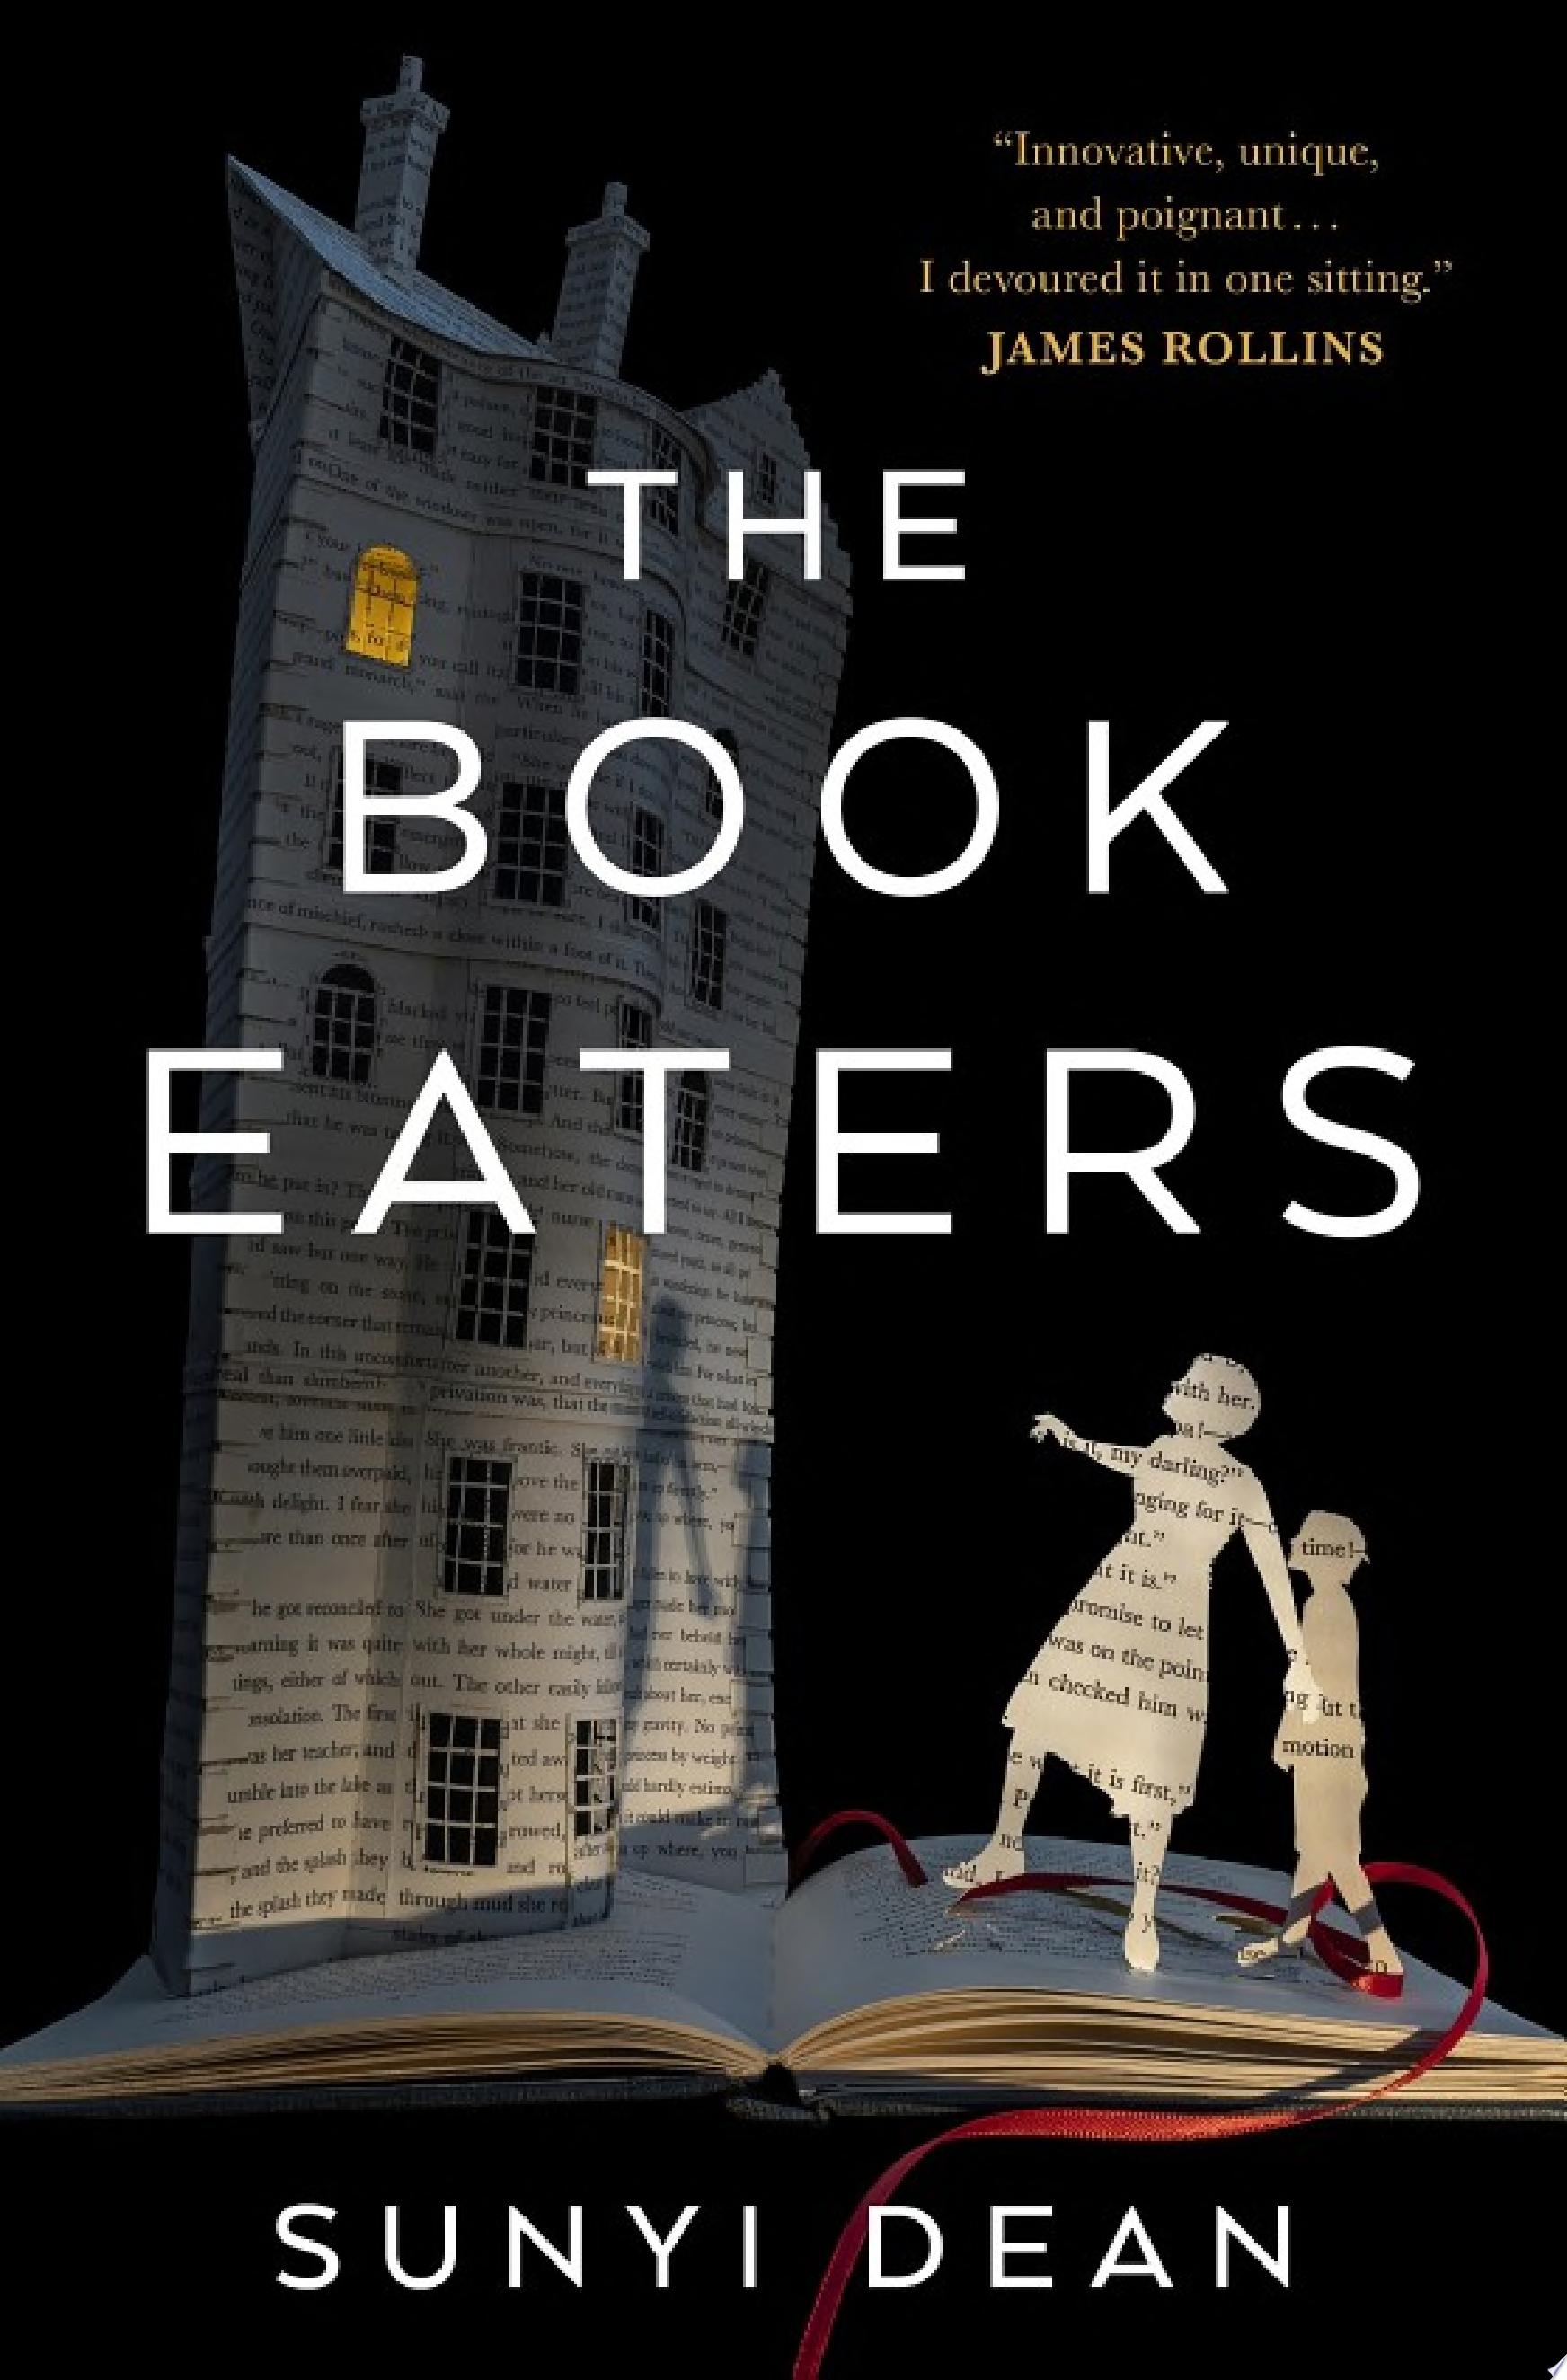 Image for "The Book Eaters"